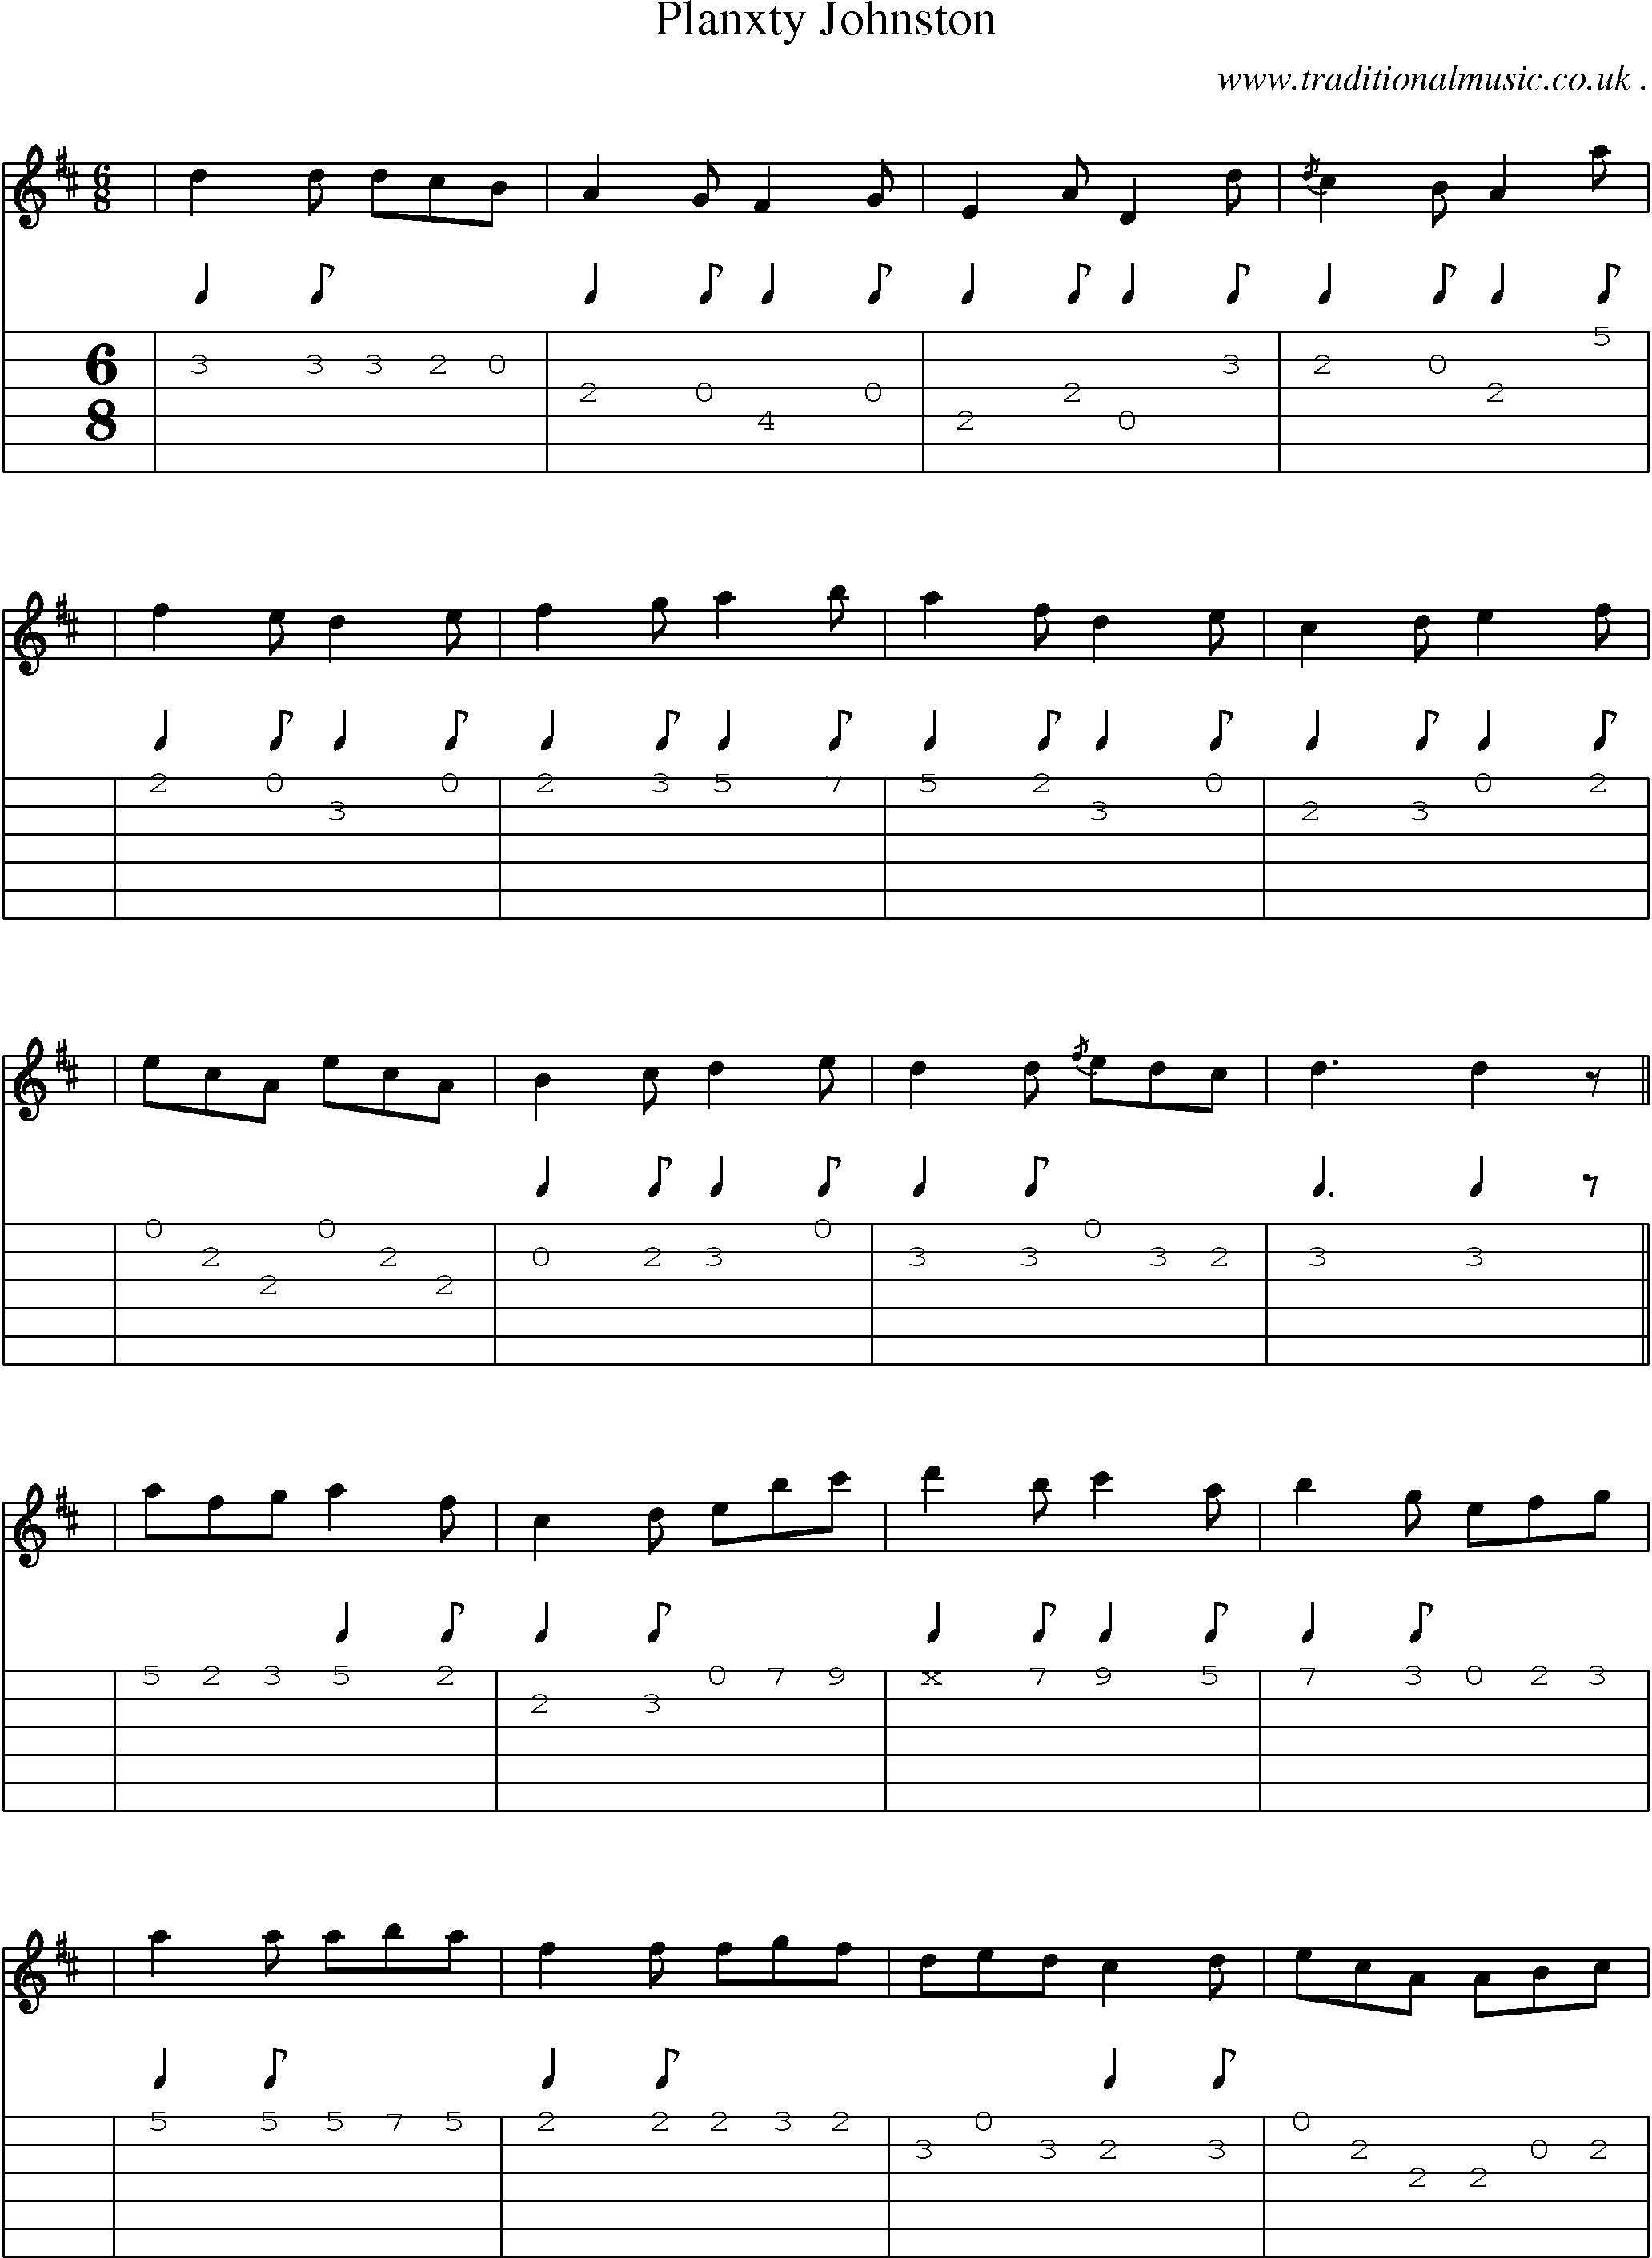 Sheet-music  score, Chords and Guitar Tabs for Planxty Johnston